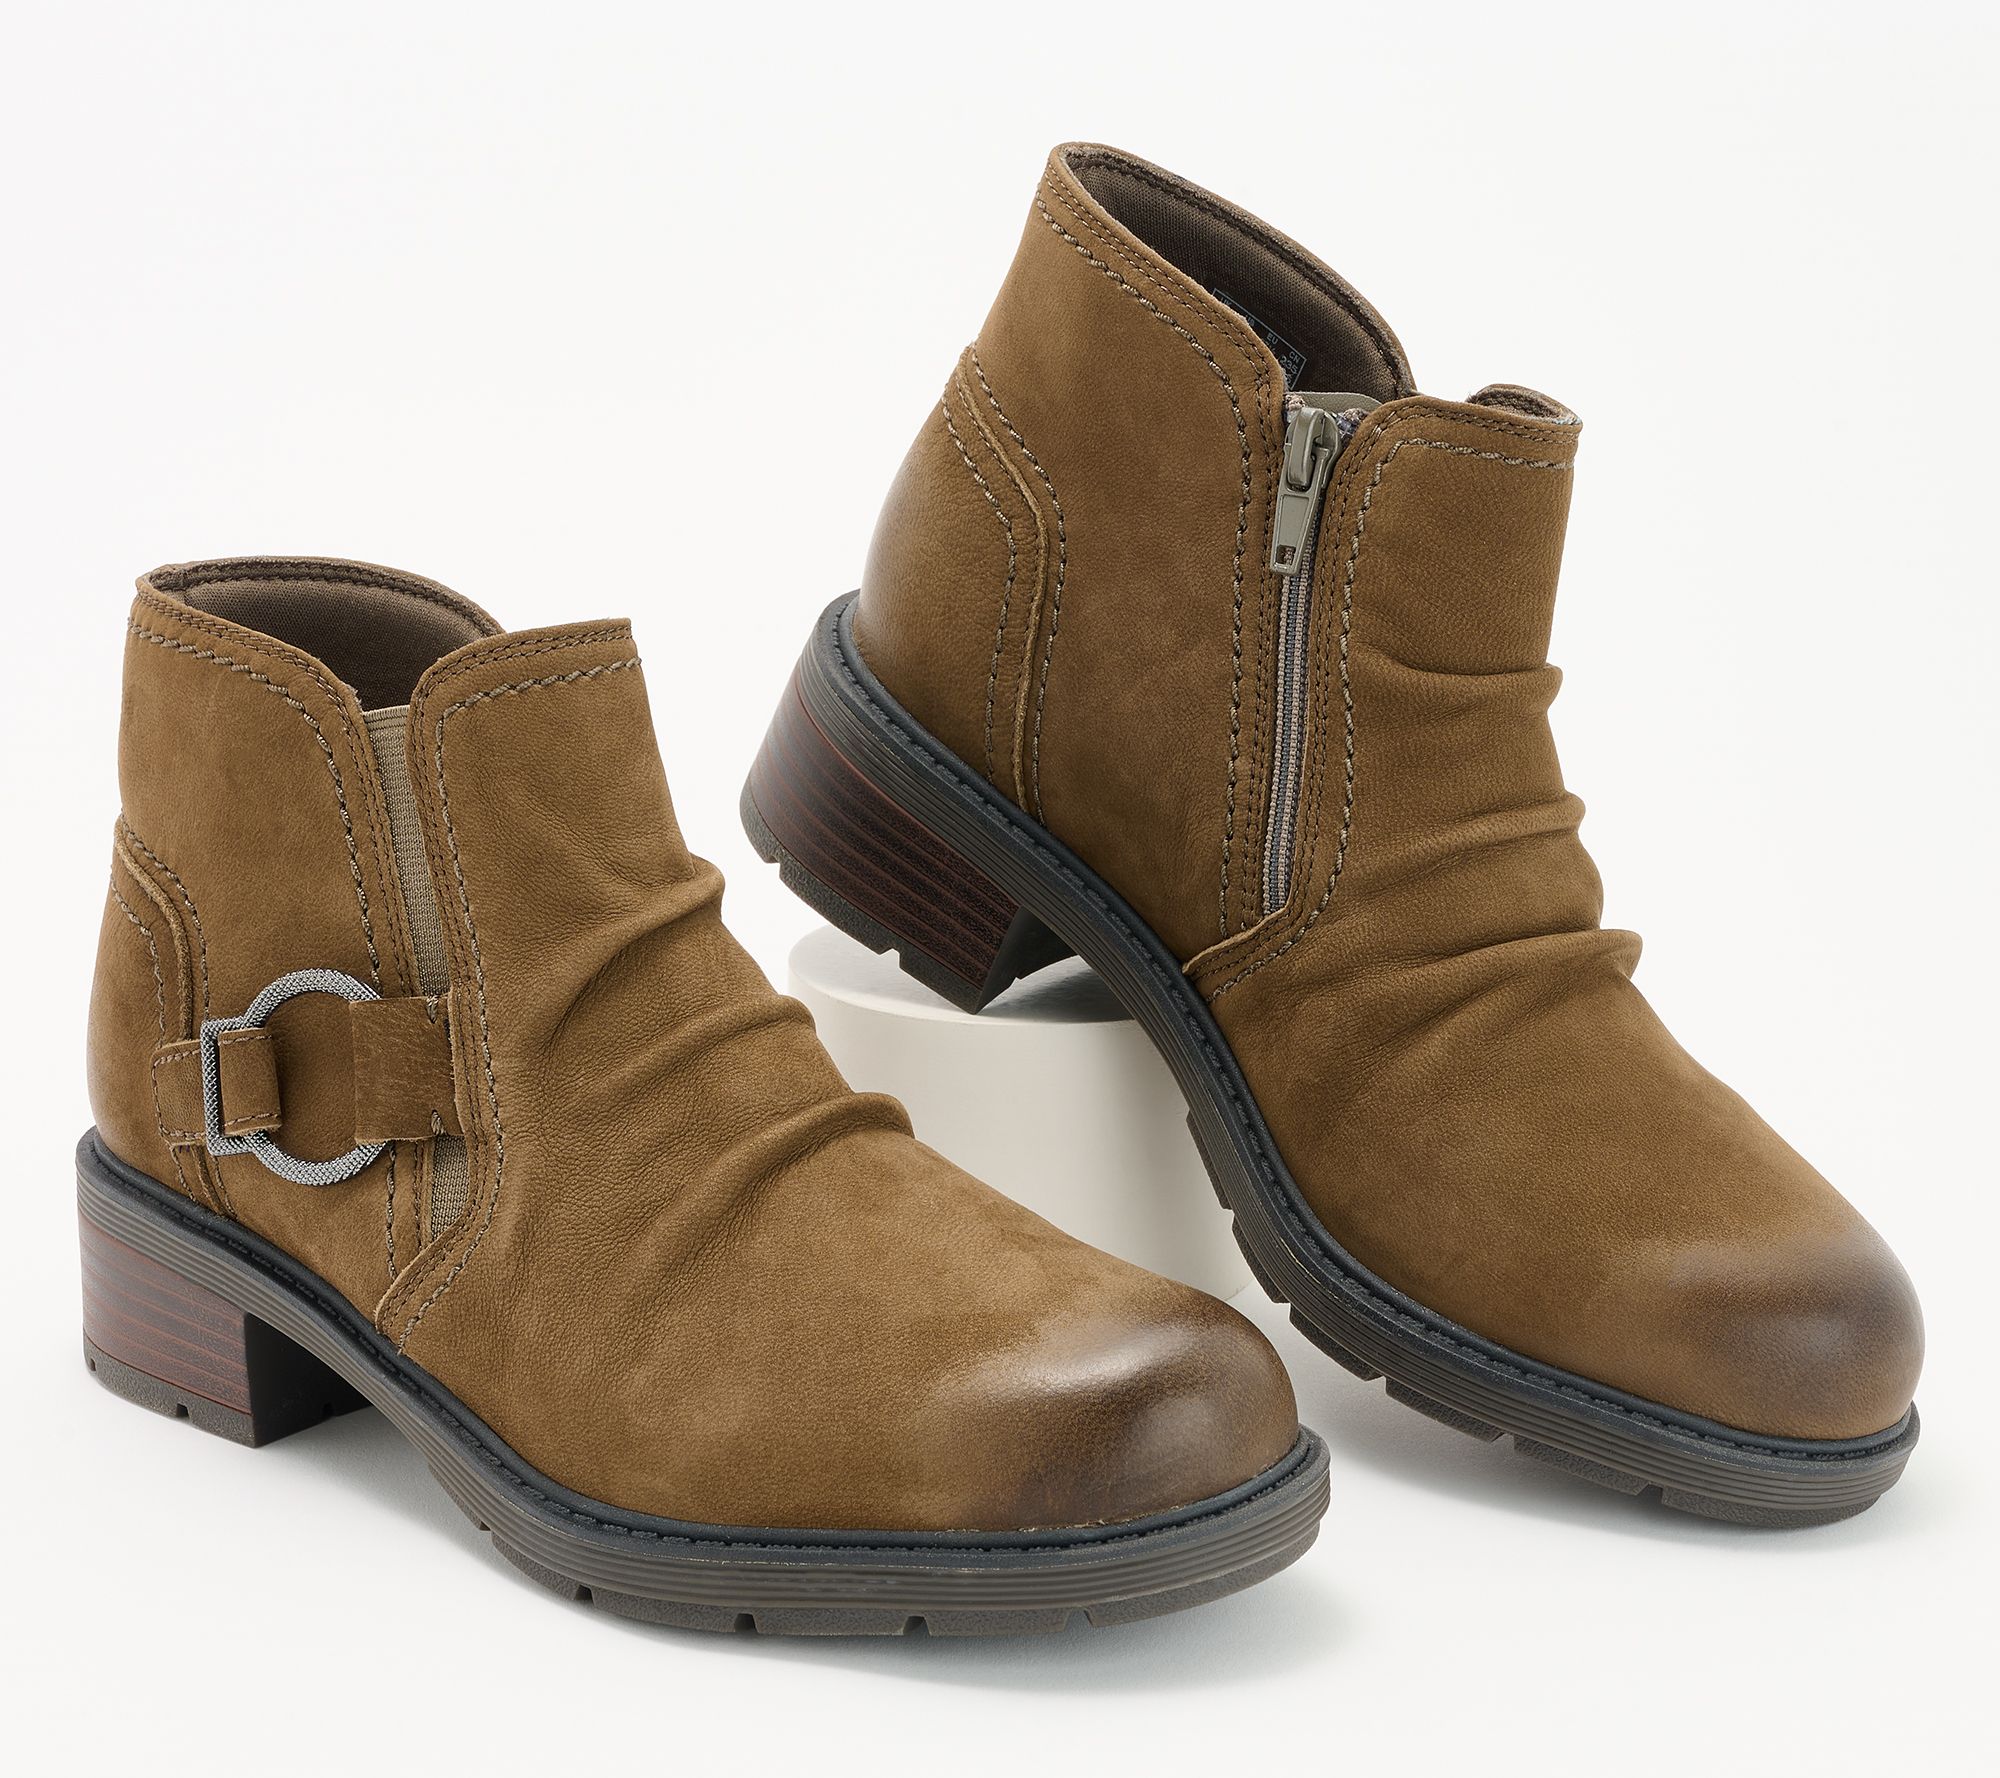 Clarks Collection Leather Ankle Boot - Hearth Fay - QVC.com